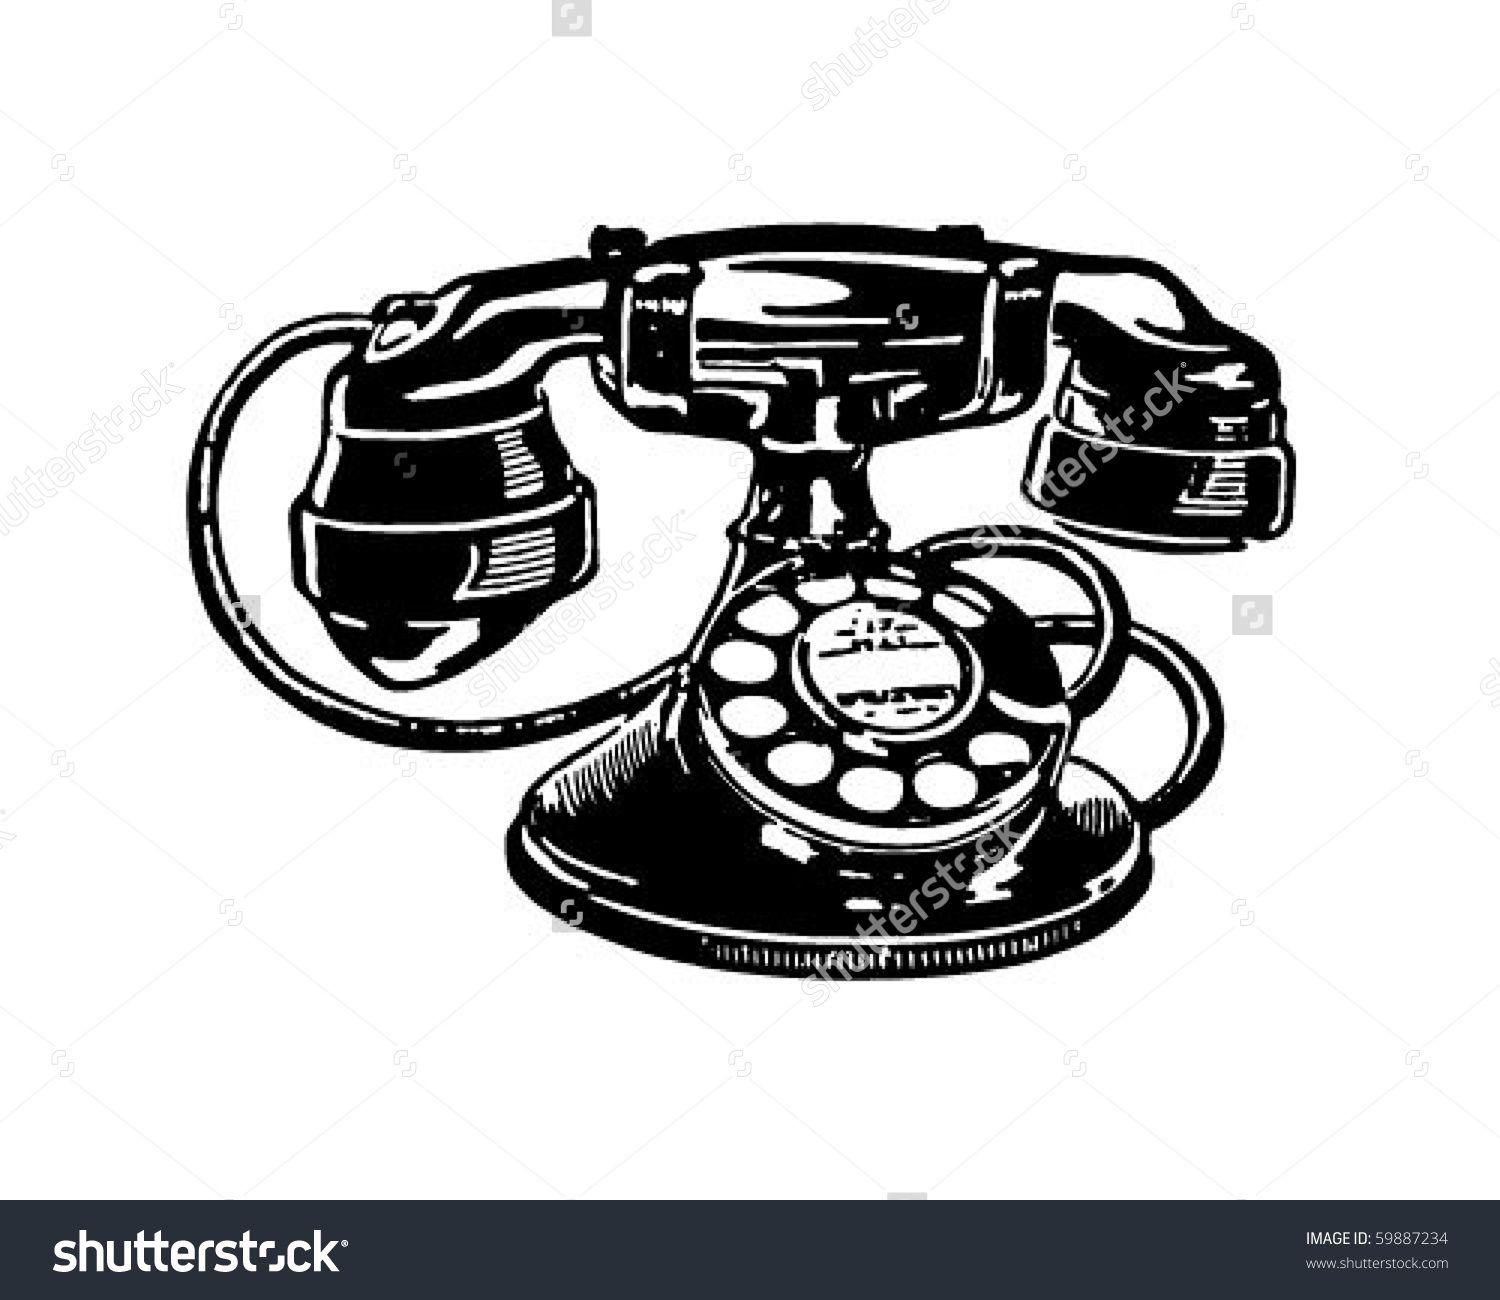 Vintage Phone Logo - Drawn Telephone black and white - Free Clipart on Dumielauxepices.net